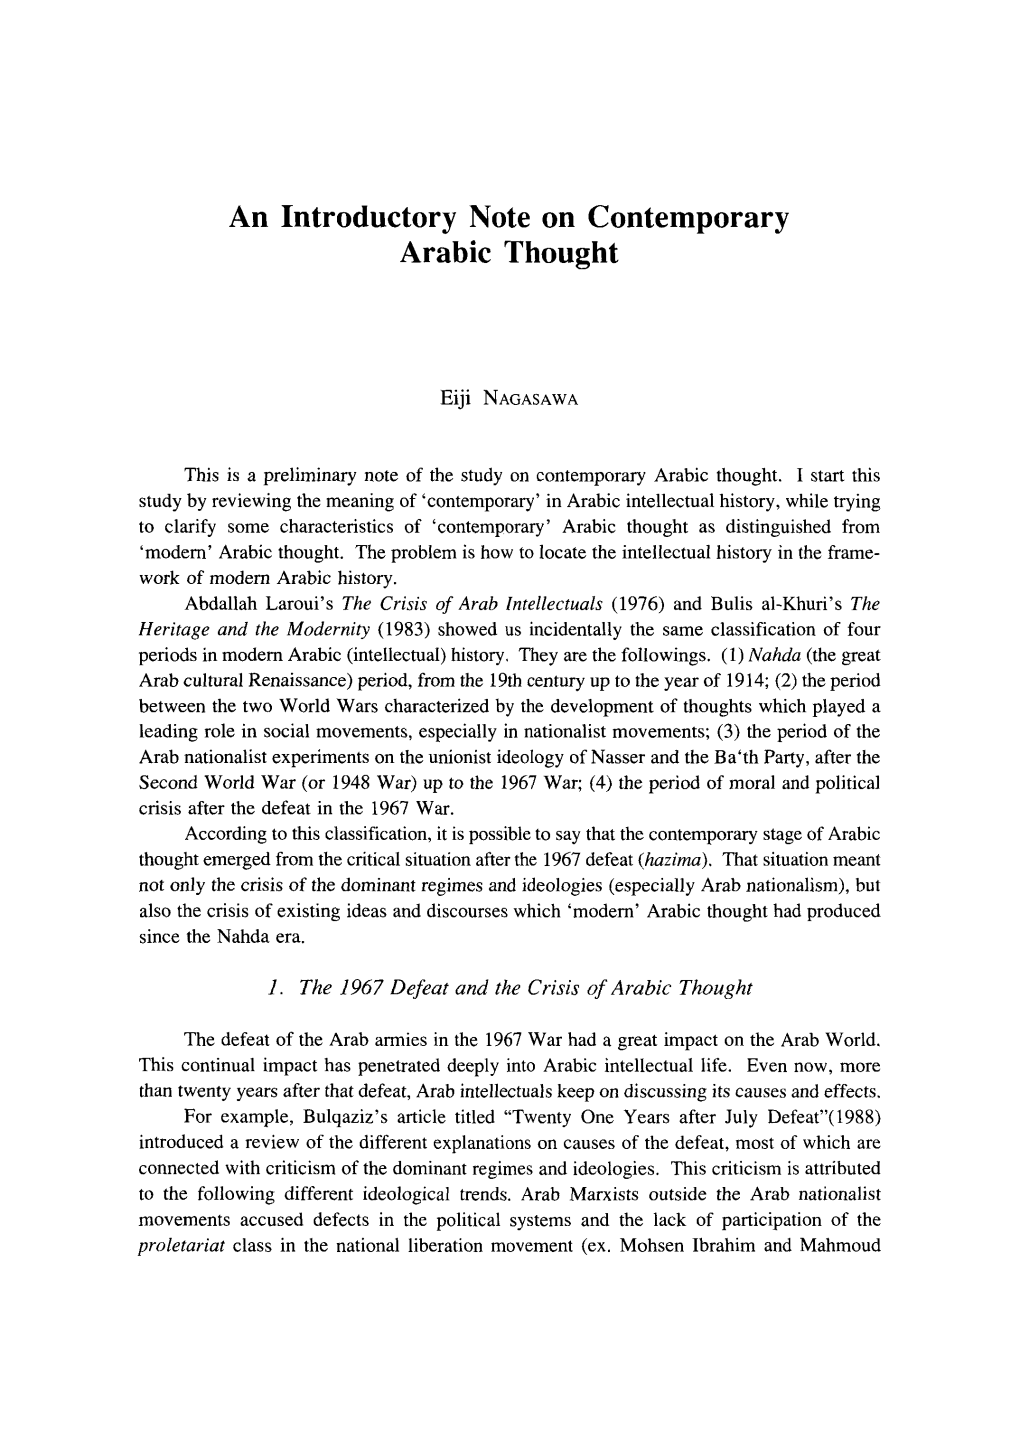 An Introductory Note on Contemporary Arabic Thought